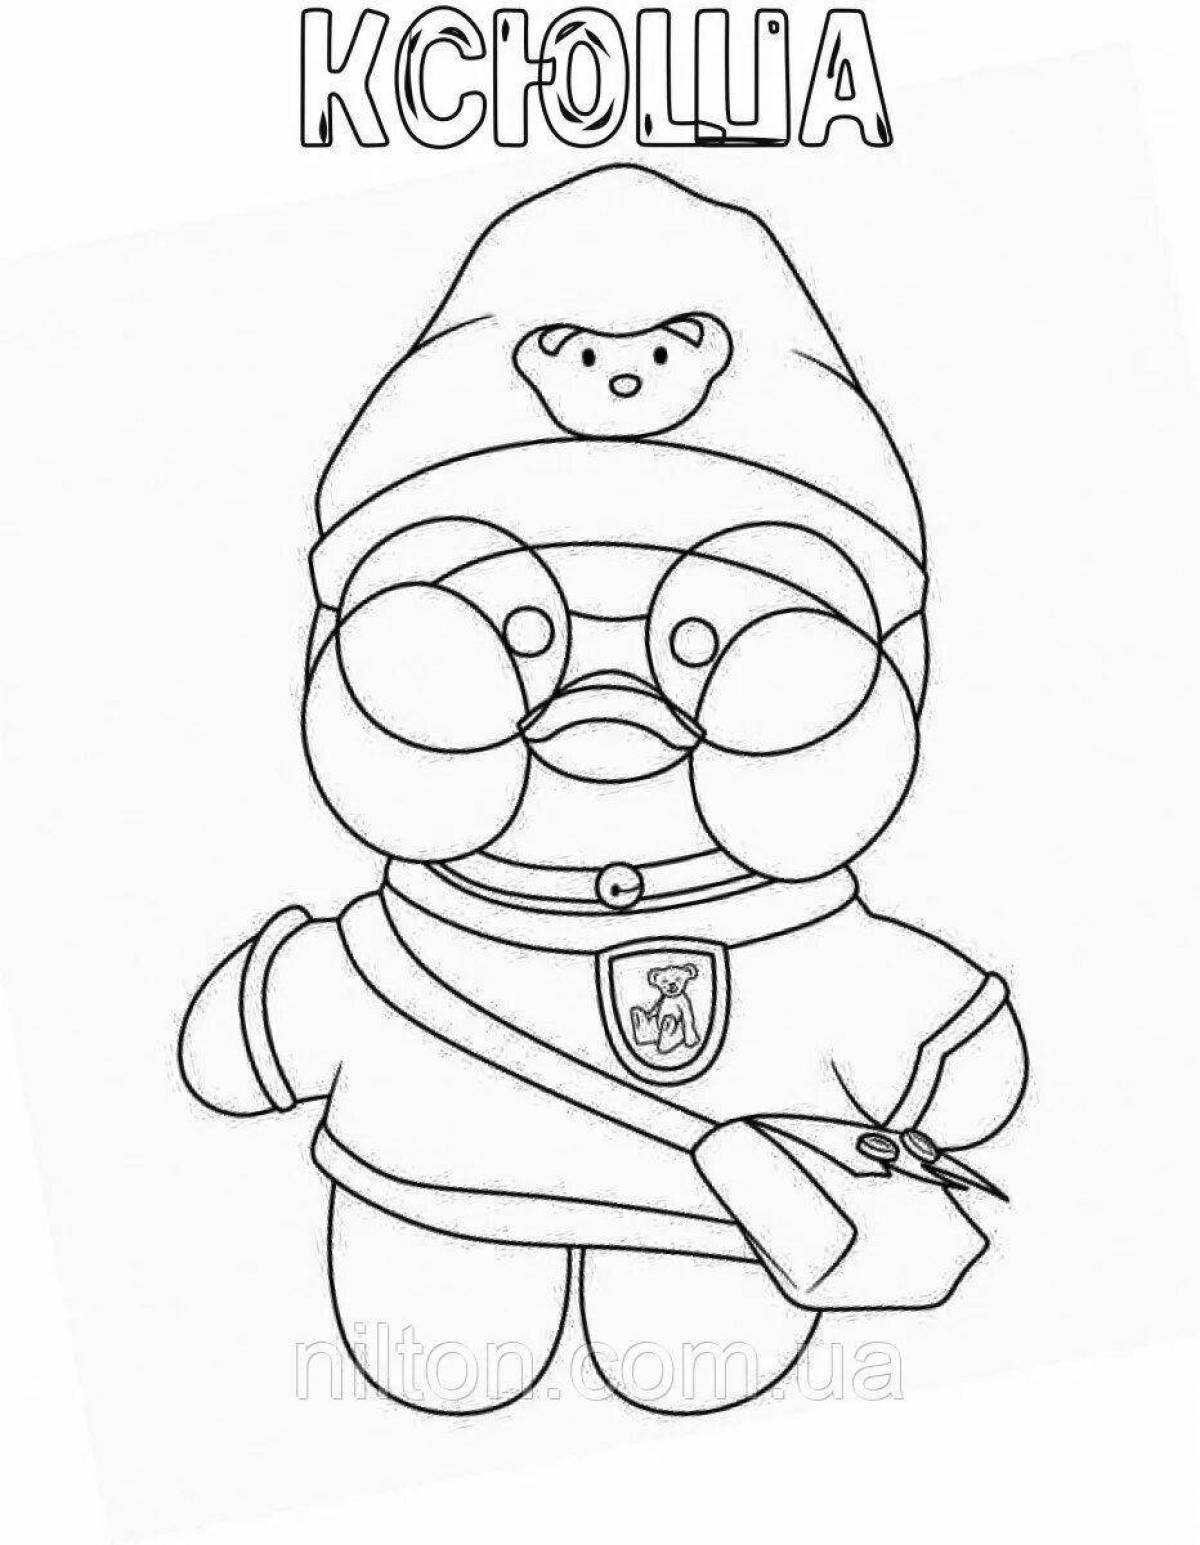 Animated duck lalyafanfan coloring book